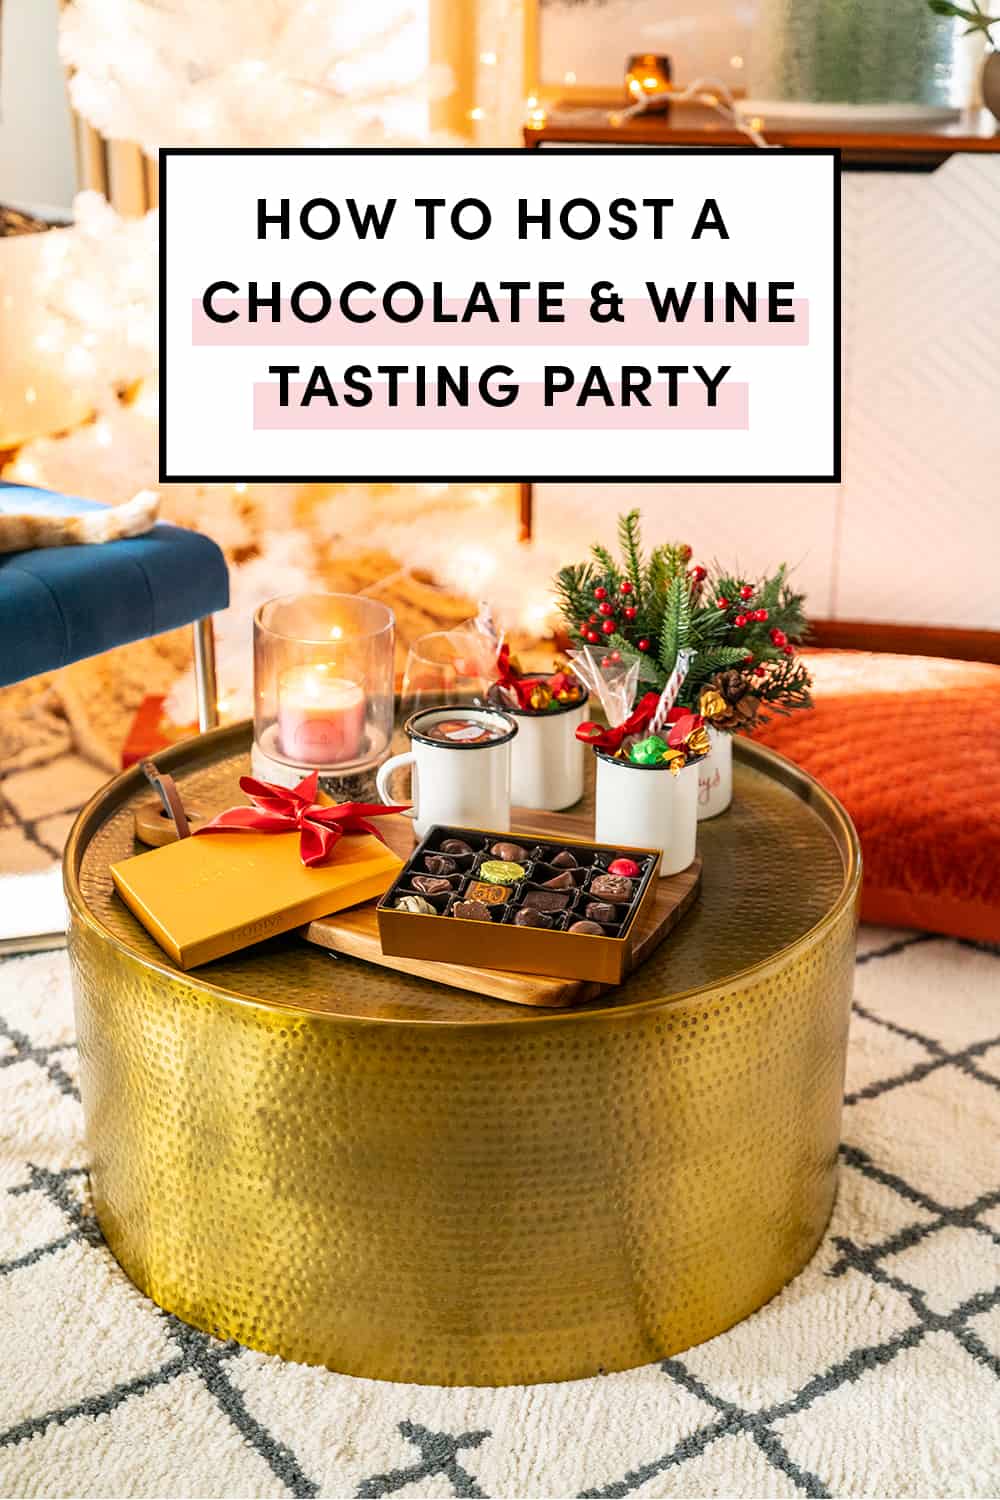 How To Host A Chocolate & Wine Tasting Party